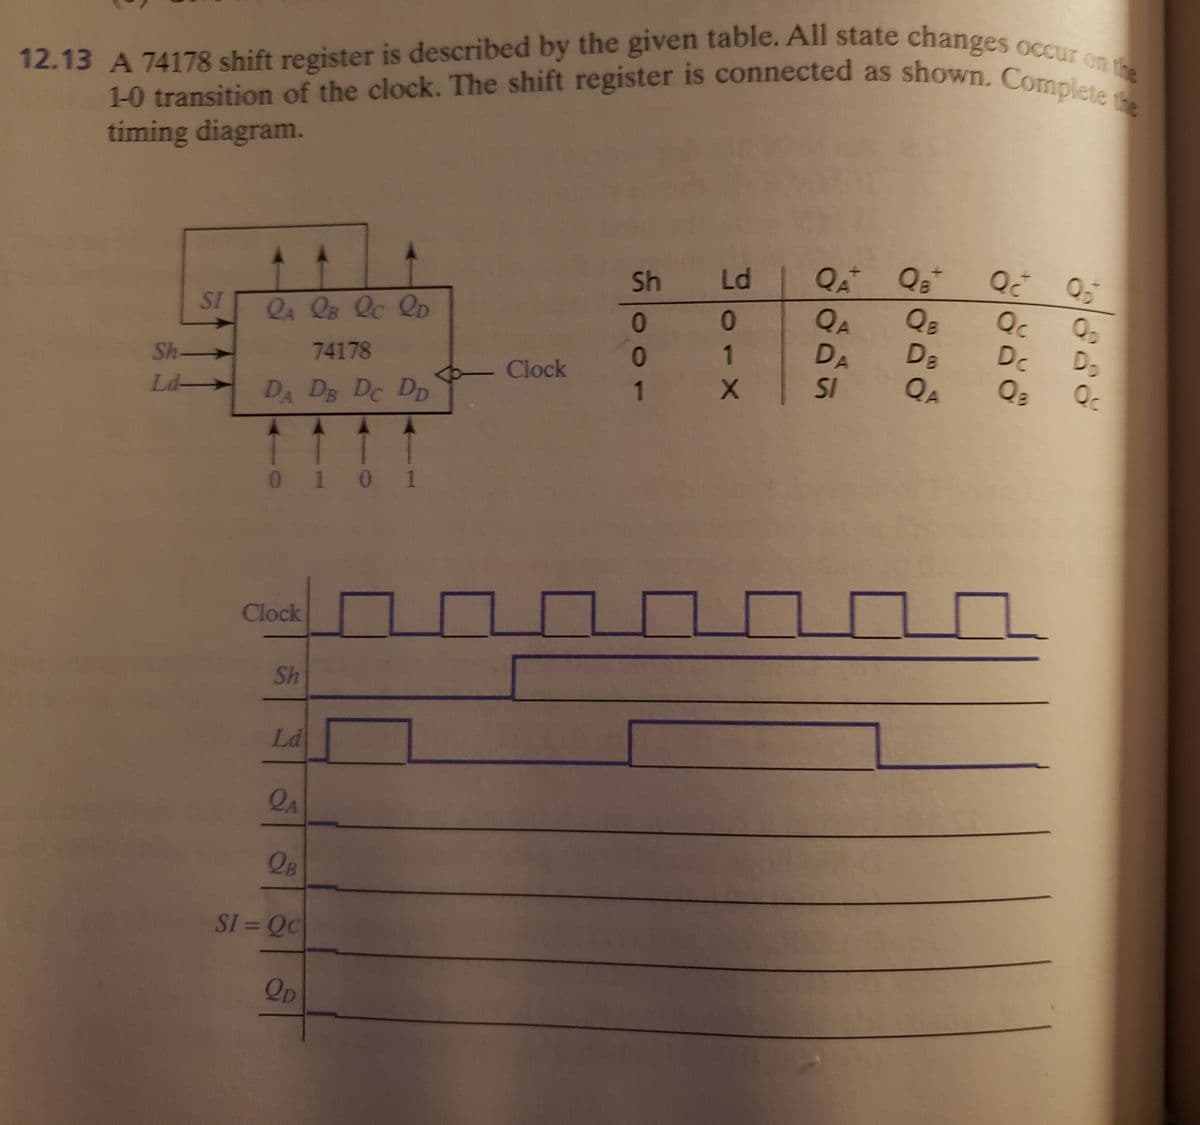 1-0 transition of the clock. The shift register is connected as shown. Complete e
12.13 A 74178 shift register is described by the given table. All state changes occur on te
timing diagram.
QA Qe
Qa
De
Sh
Ld
Qc
QA
DA
SI
QA OB Oc Q.
01
01
1
Dc
D-
Sh
-
74178
- Clock
Q3
1
SI
Ld-
DA DB Dc DD
0 1 0 1
Clock
Sh
Ld
QA
QB
SI = QC
Qp
